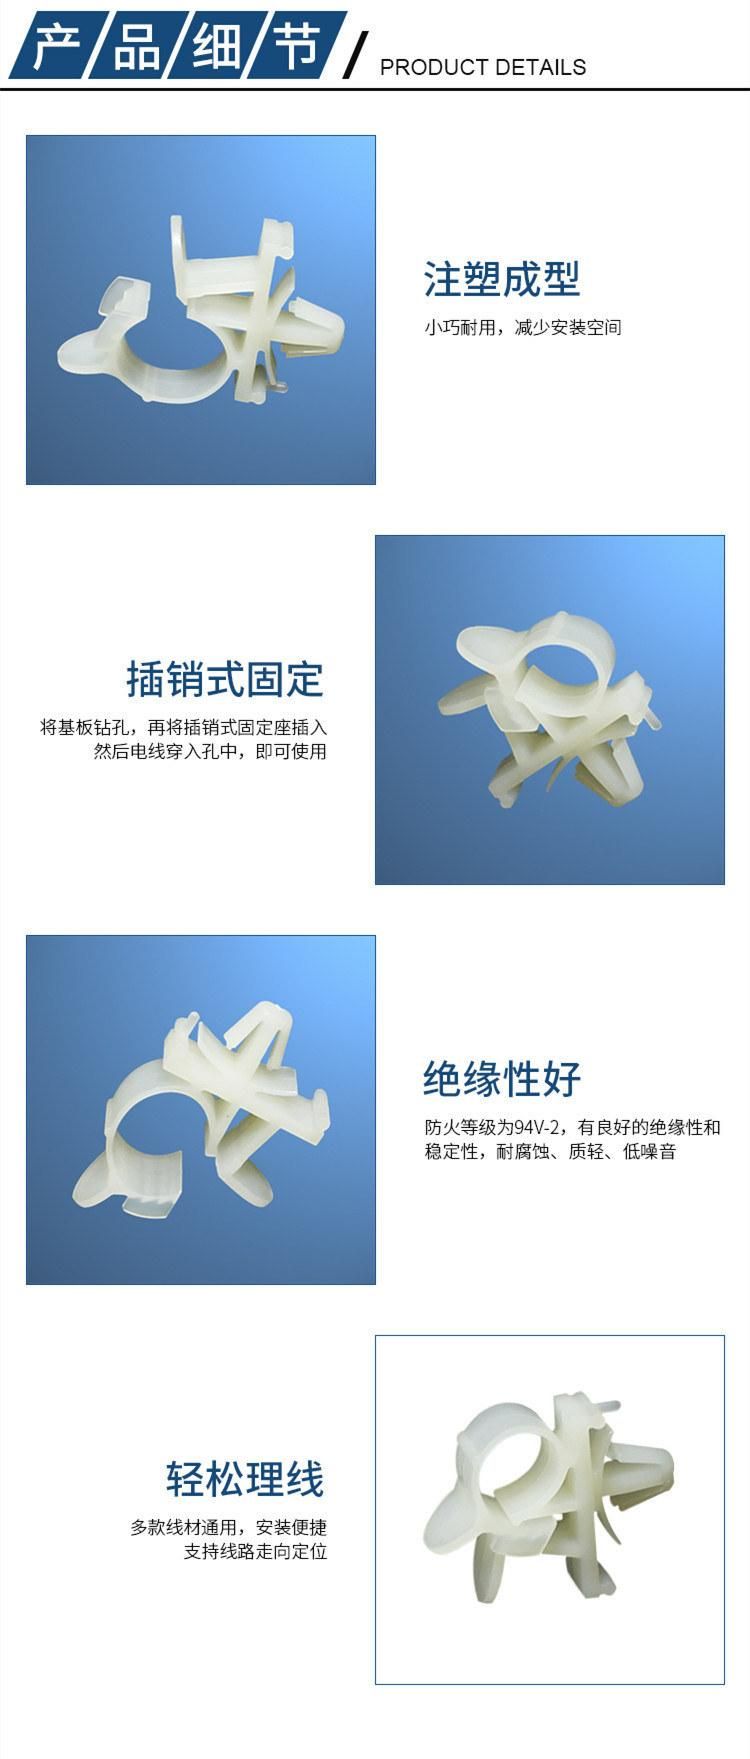 Plastic Cable Fasten Saddle Wire Routing Positioning, Heyingcn Factory Supply Insulation Nylon Wire Clip